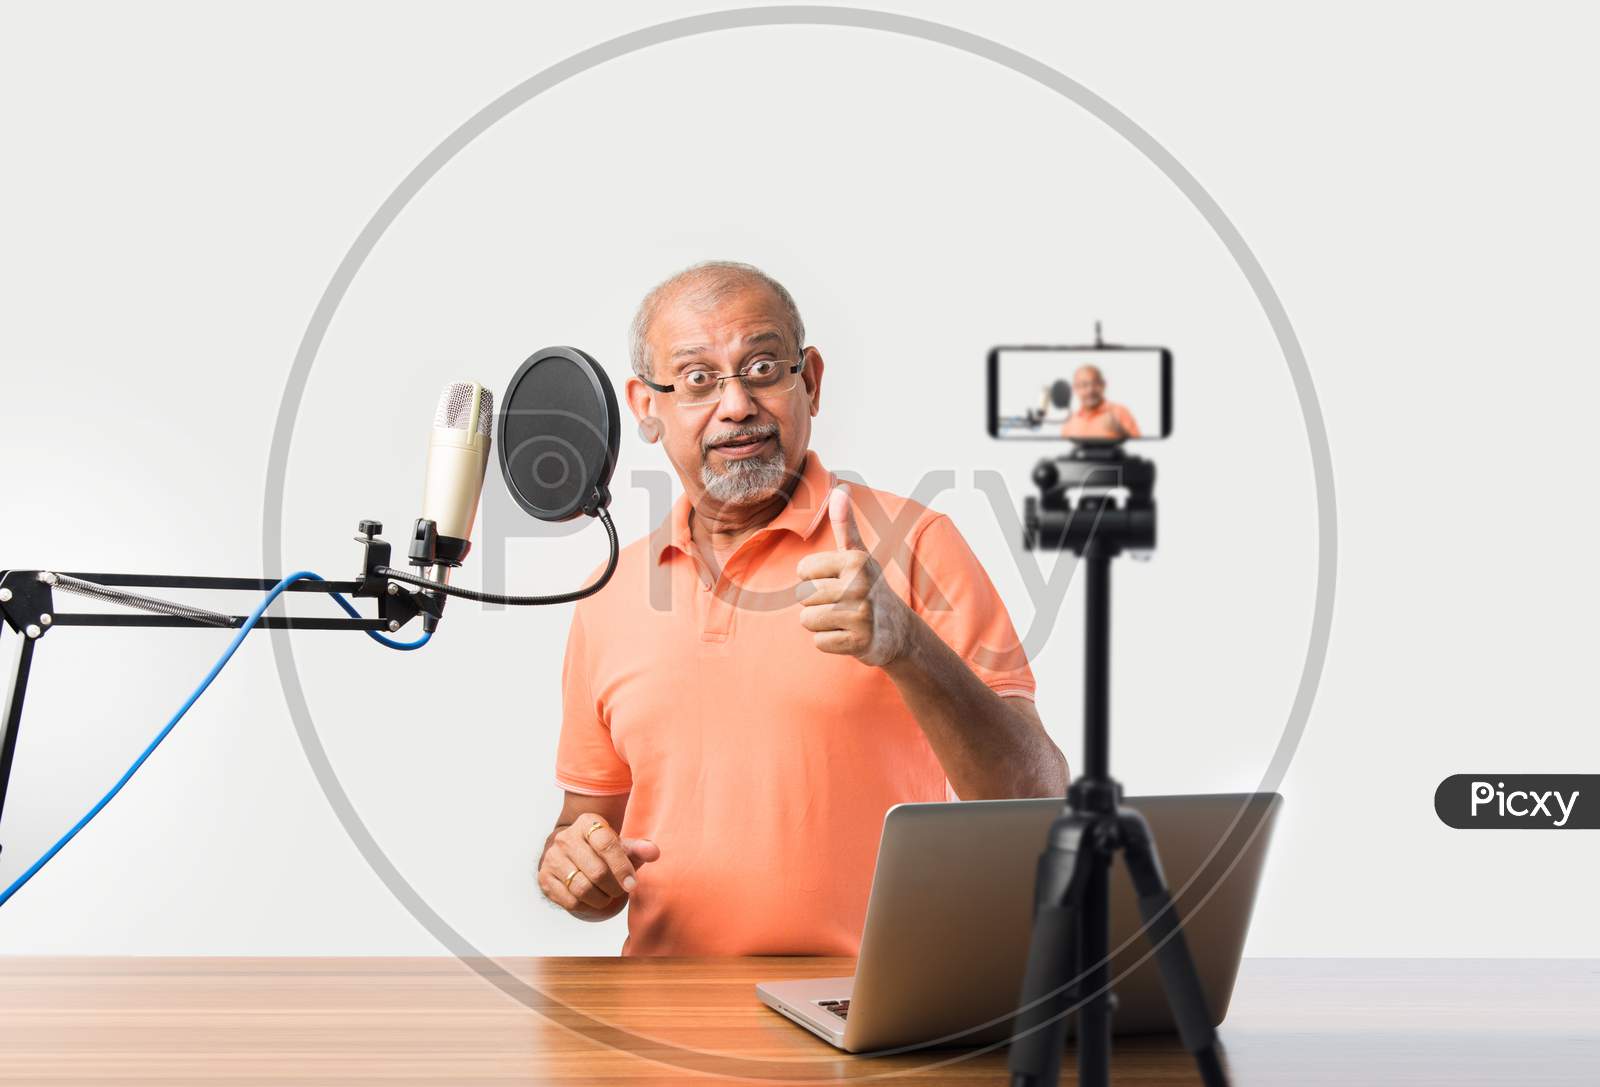 Indian Asian Old Man Video Blogger Speaking In Microphone While Recording A Video In Smartphone